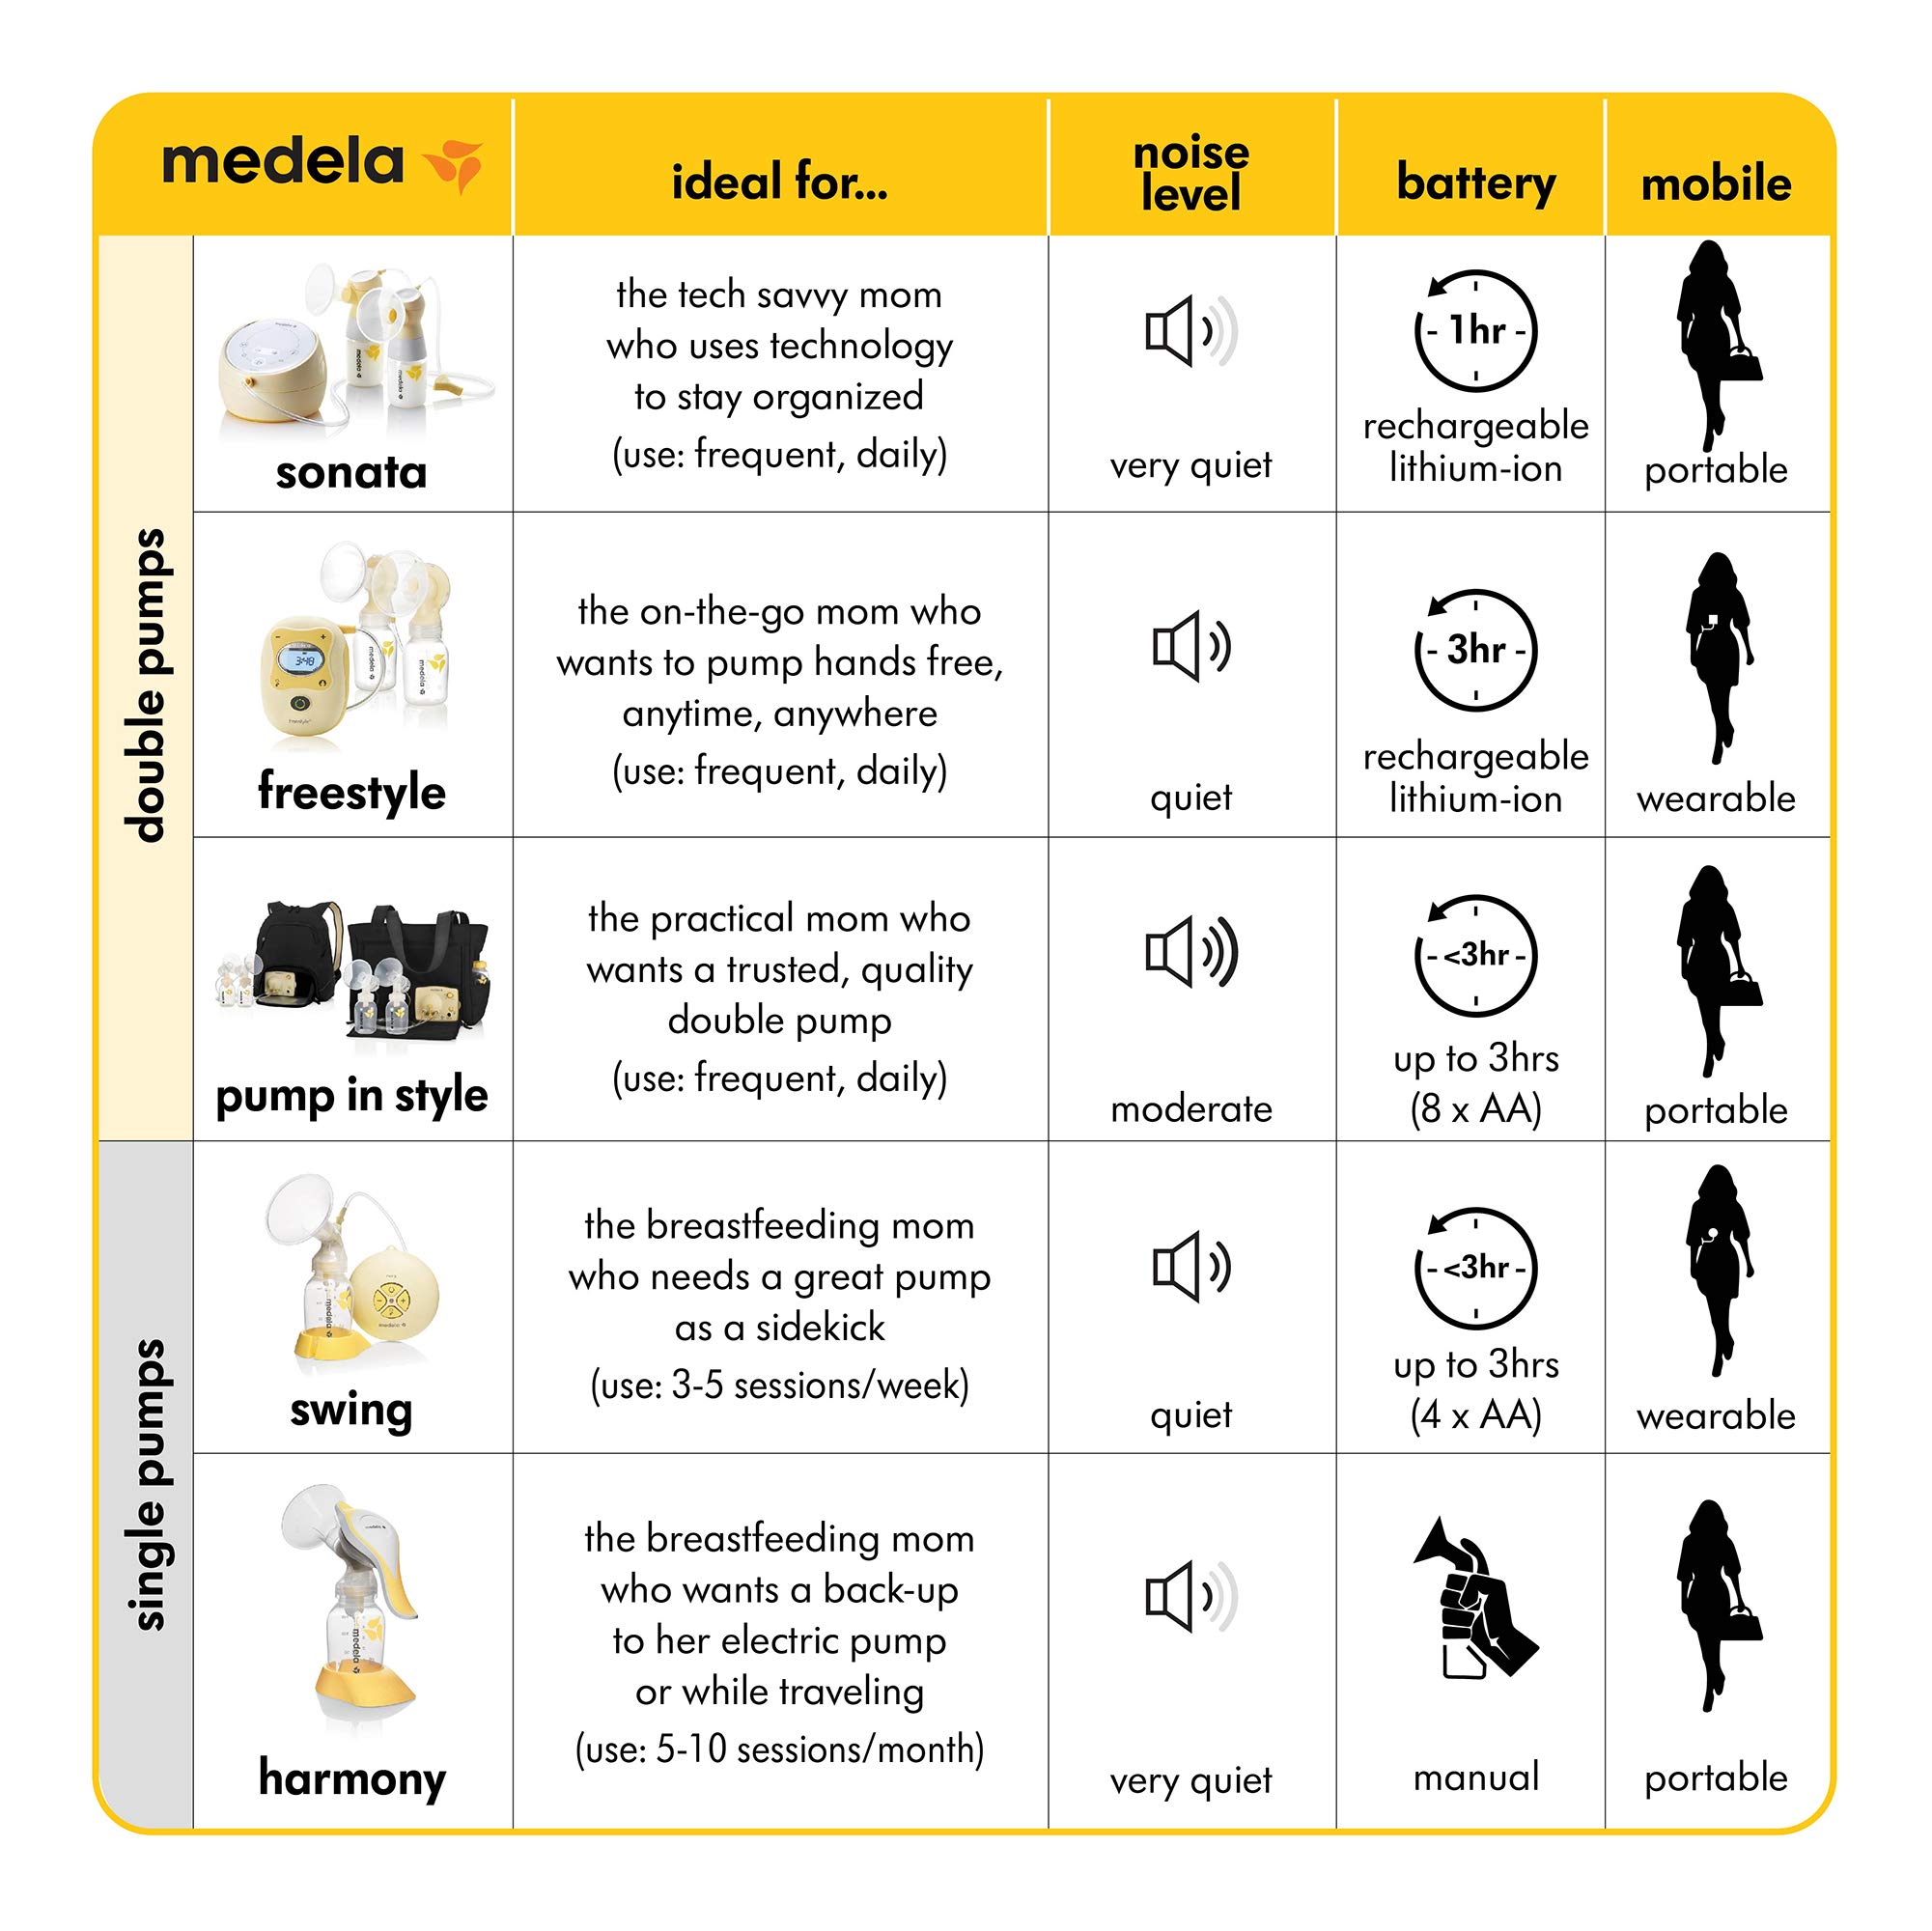 Medela, Harmony Breast Pump, Manual Breast Pump, Portable Pump, 2-Phase Expression Technology, Ergonomic Swivel Handle, Easy to Control Vaccuum, Designed for Occasional Use